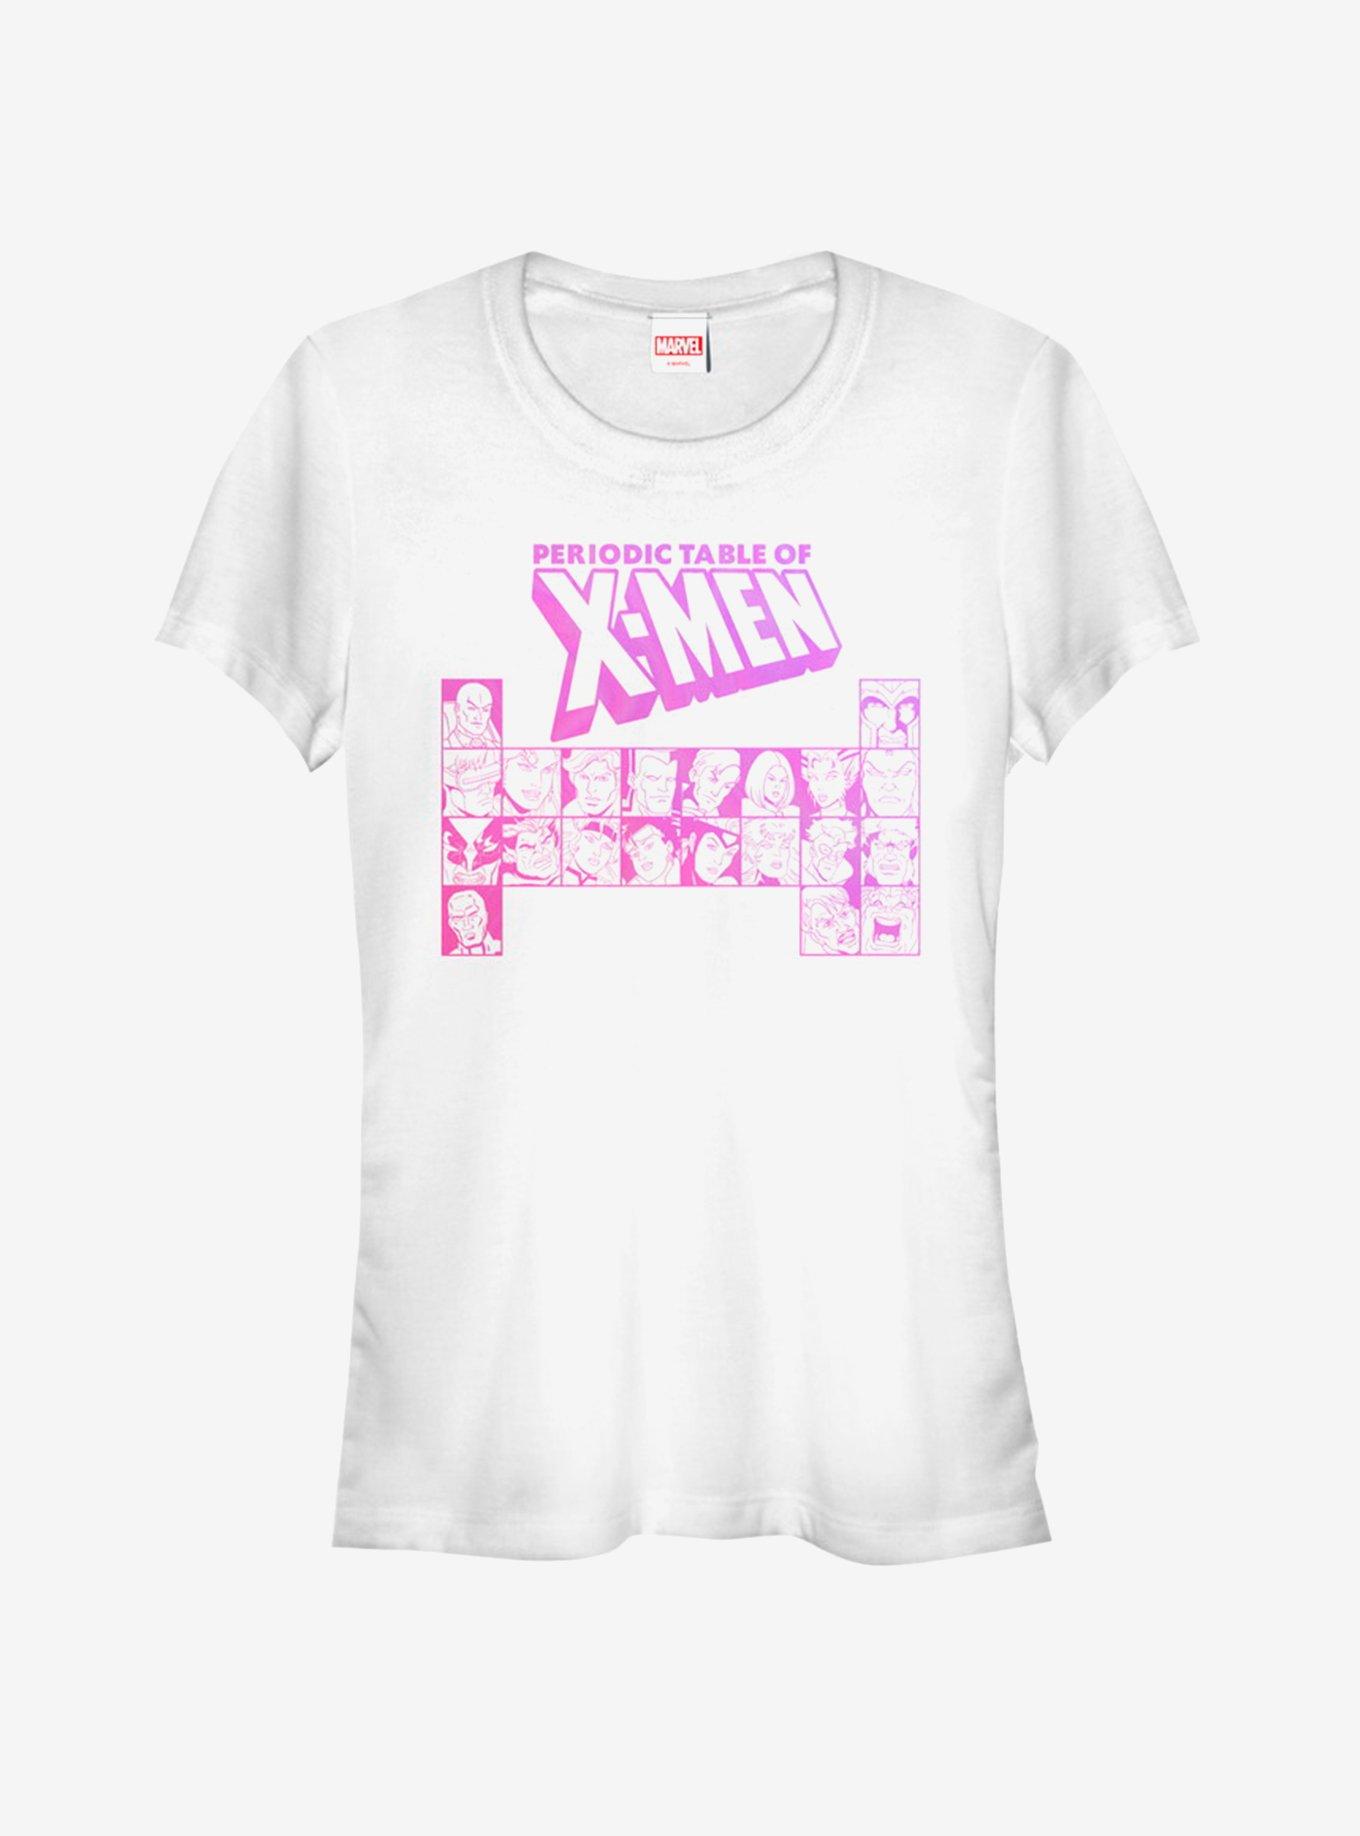 Marvel X-Men Characters Periodic Table Girls T-Shirt, WHITE, hi-res